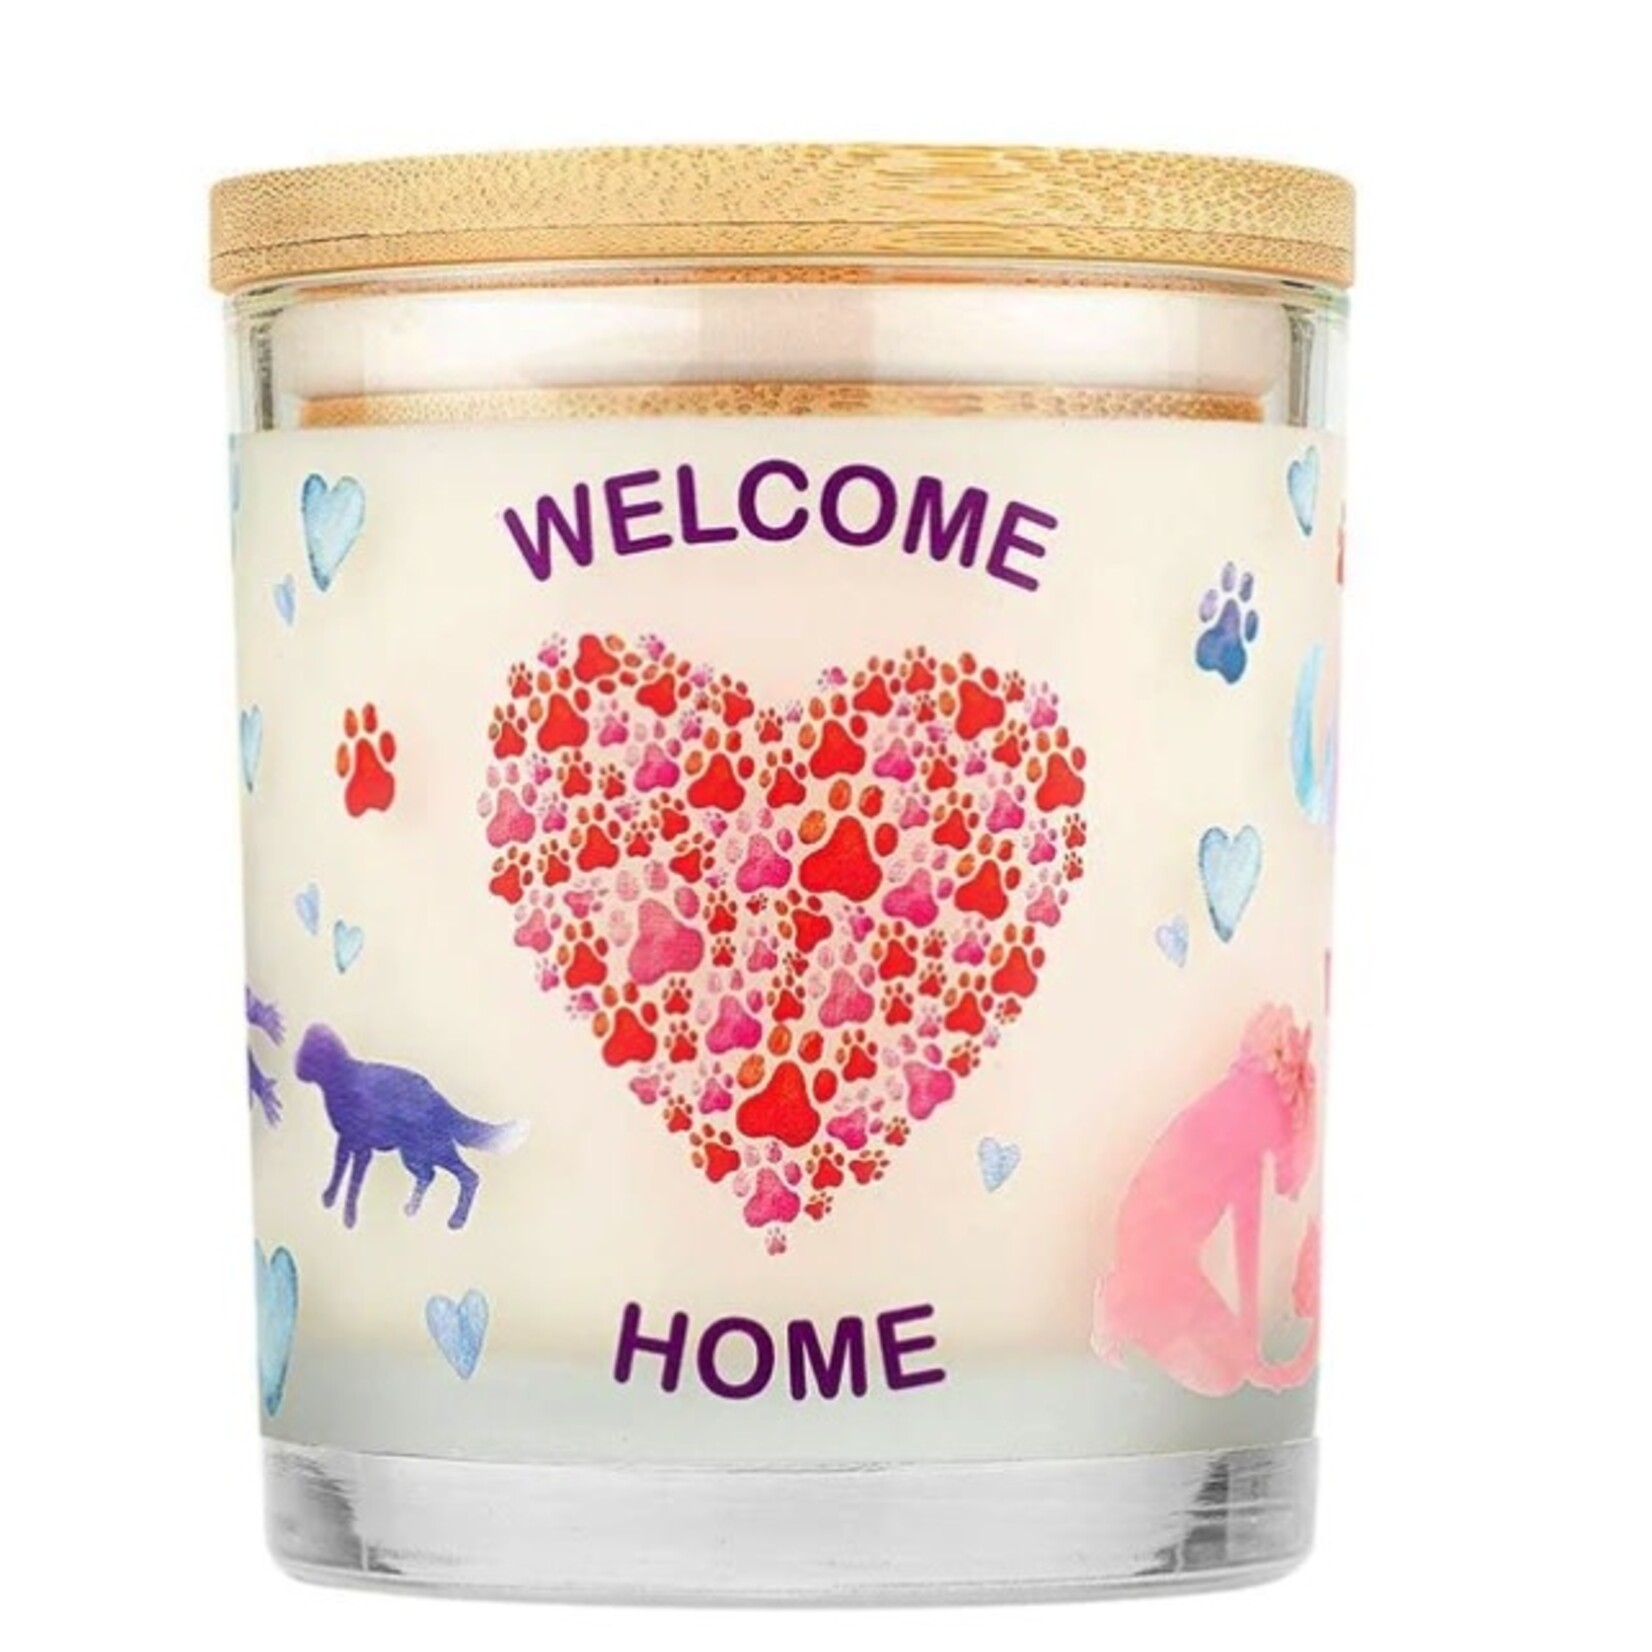 PET HOUSE CANDLE Pet House Candle Welcome Home